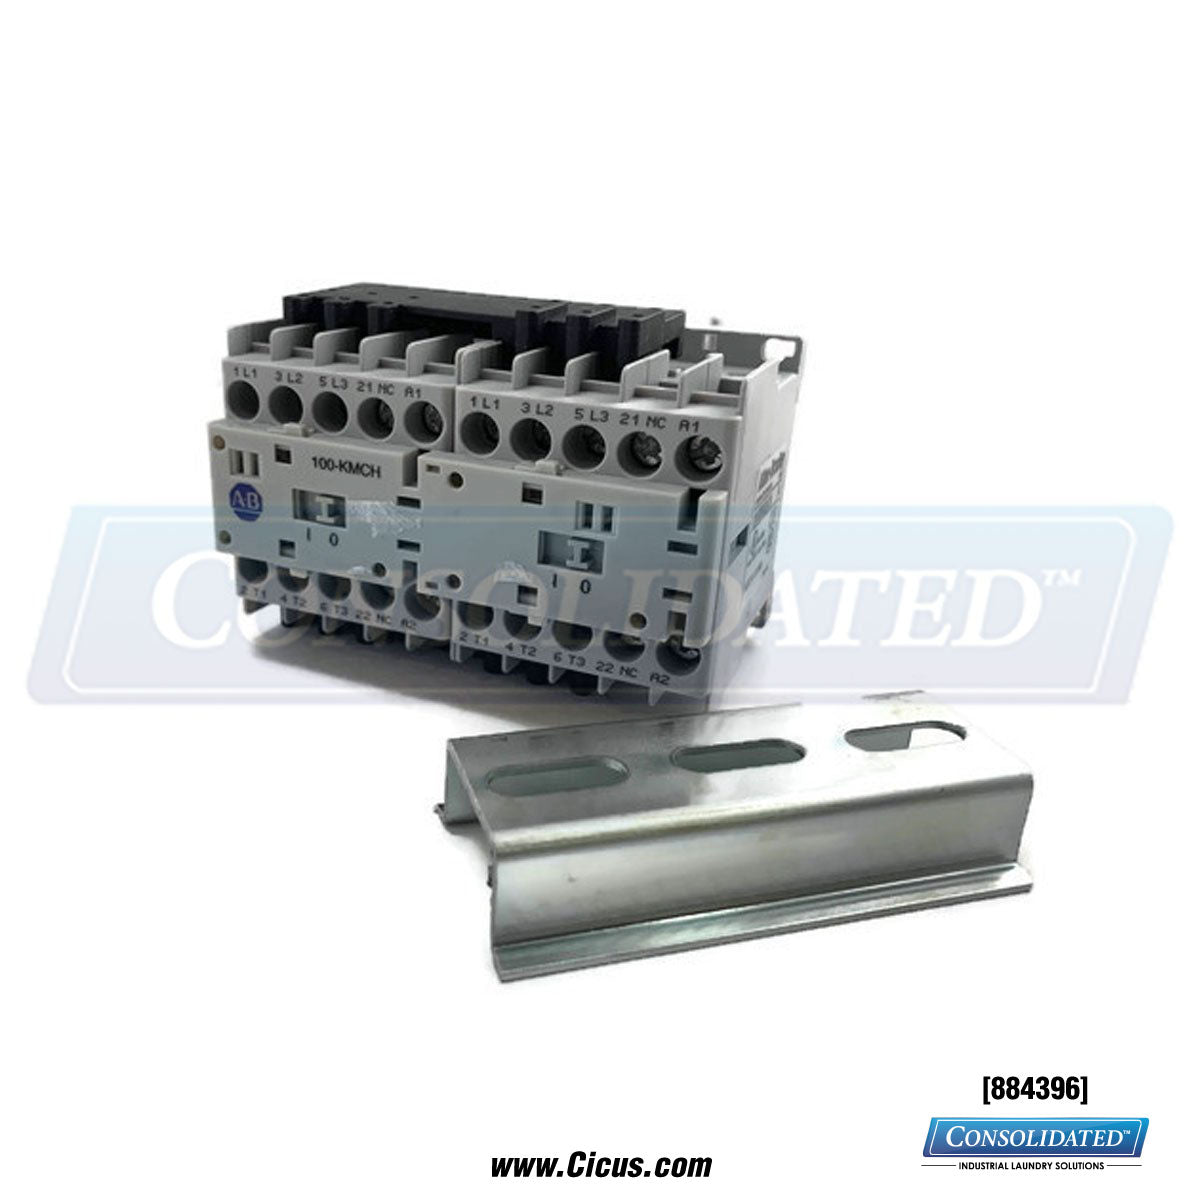 American Dryer Company (ADC) 24v Reversing Contact Conv [884396] - Front View